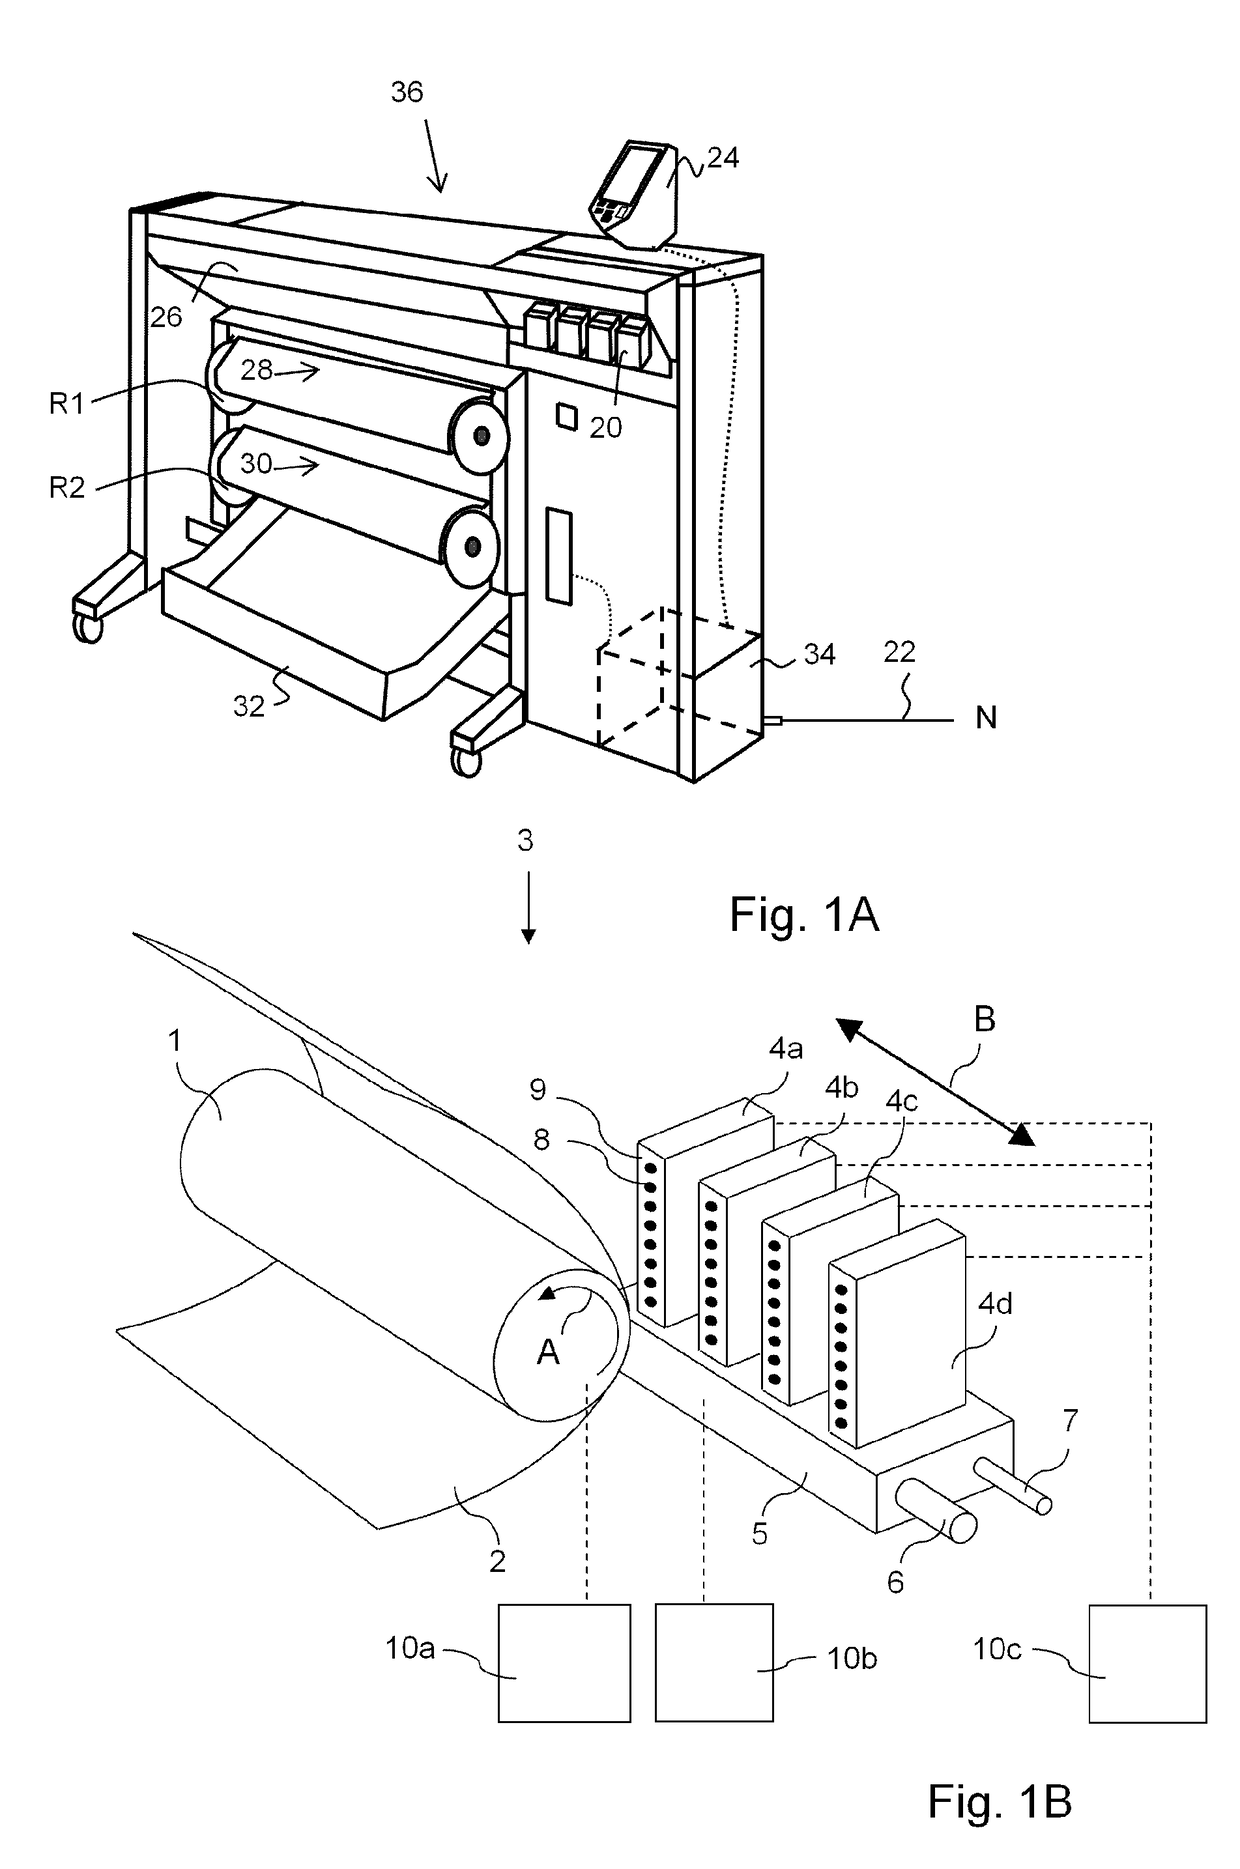 Method for detecting an operating state of an inkjet print head nozzle